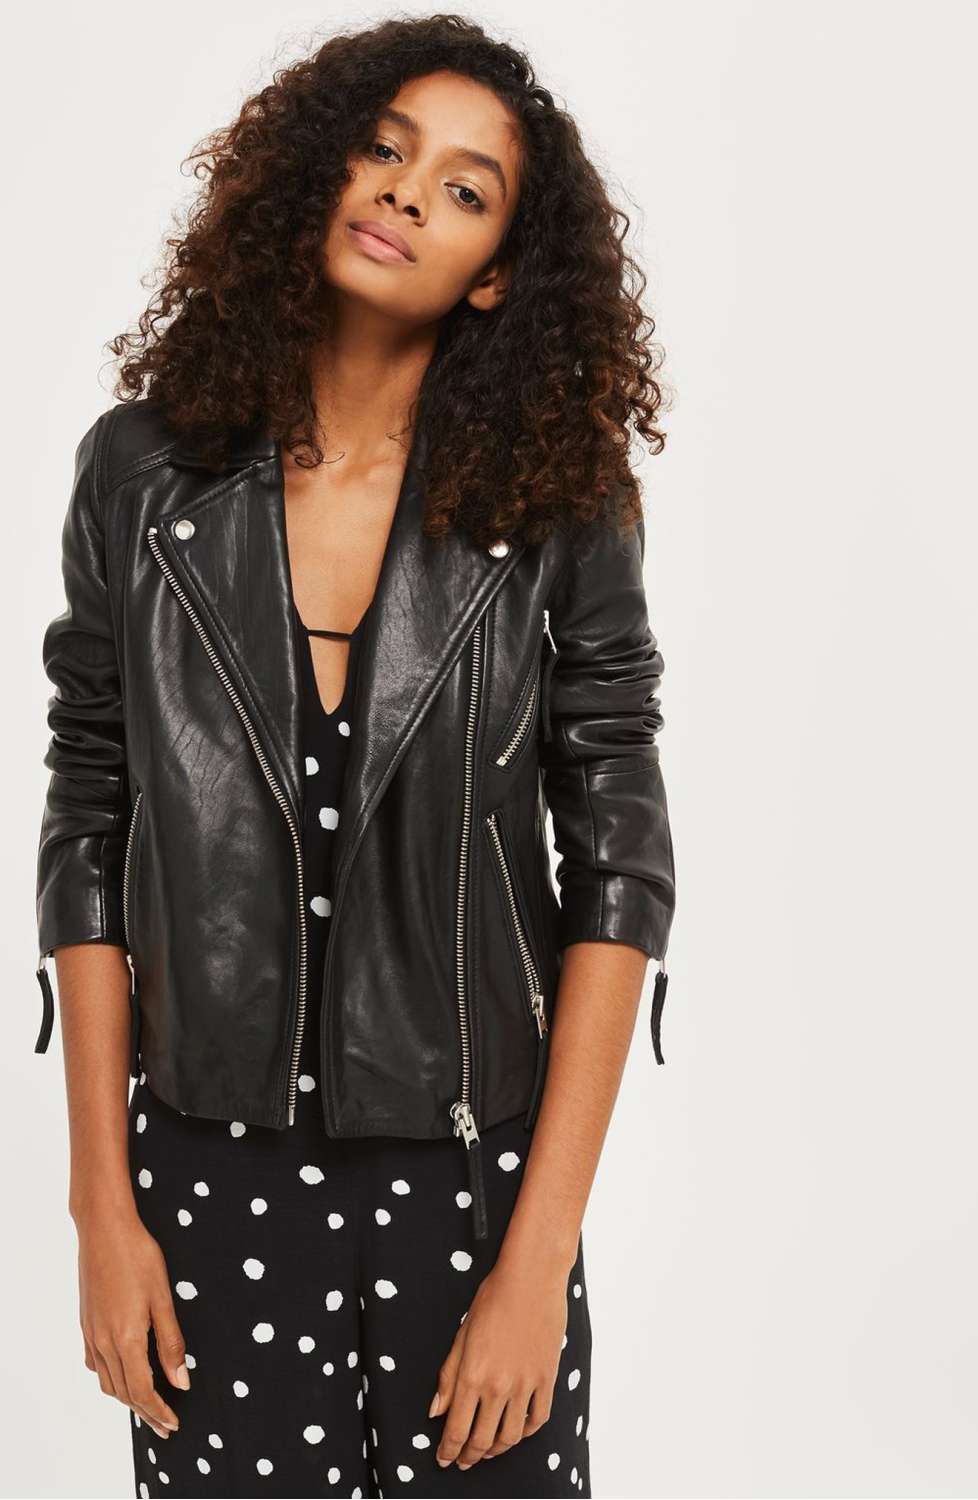 Every Single Thing You Need From Nordstrom’s Epic Anniversary Sale